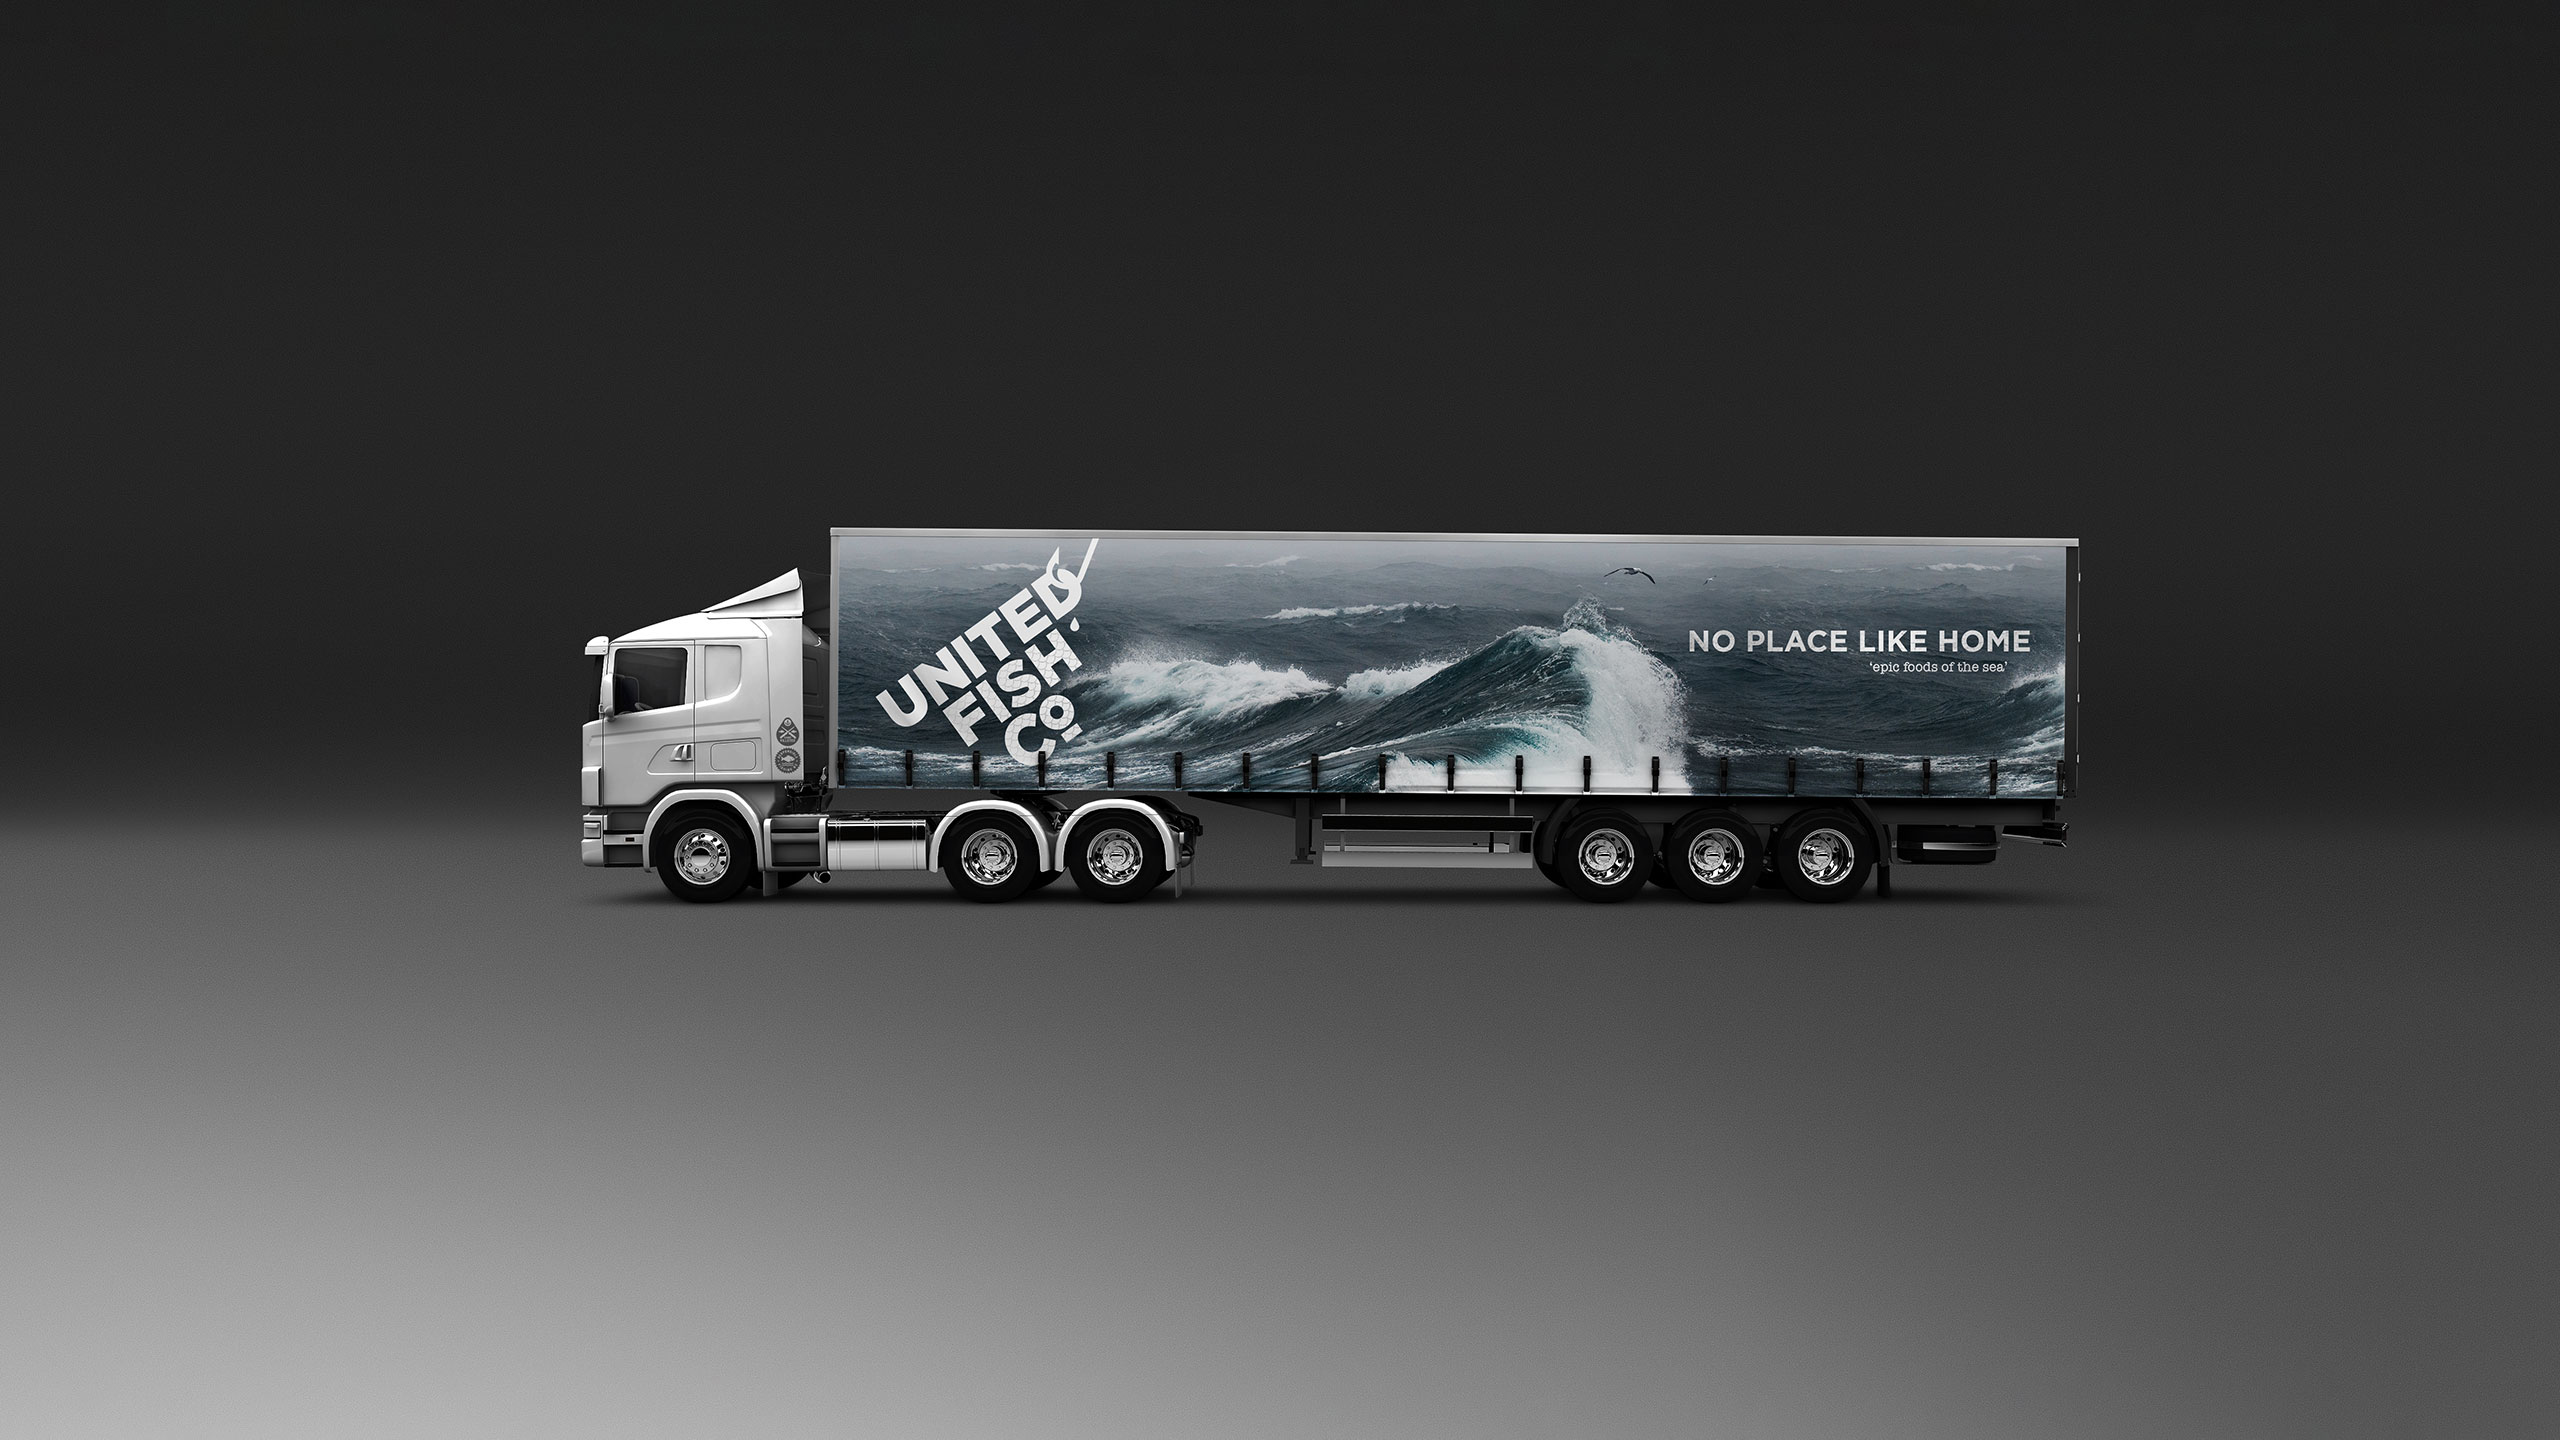 United Fish Co truck with sea wave image